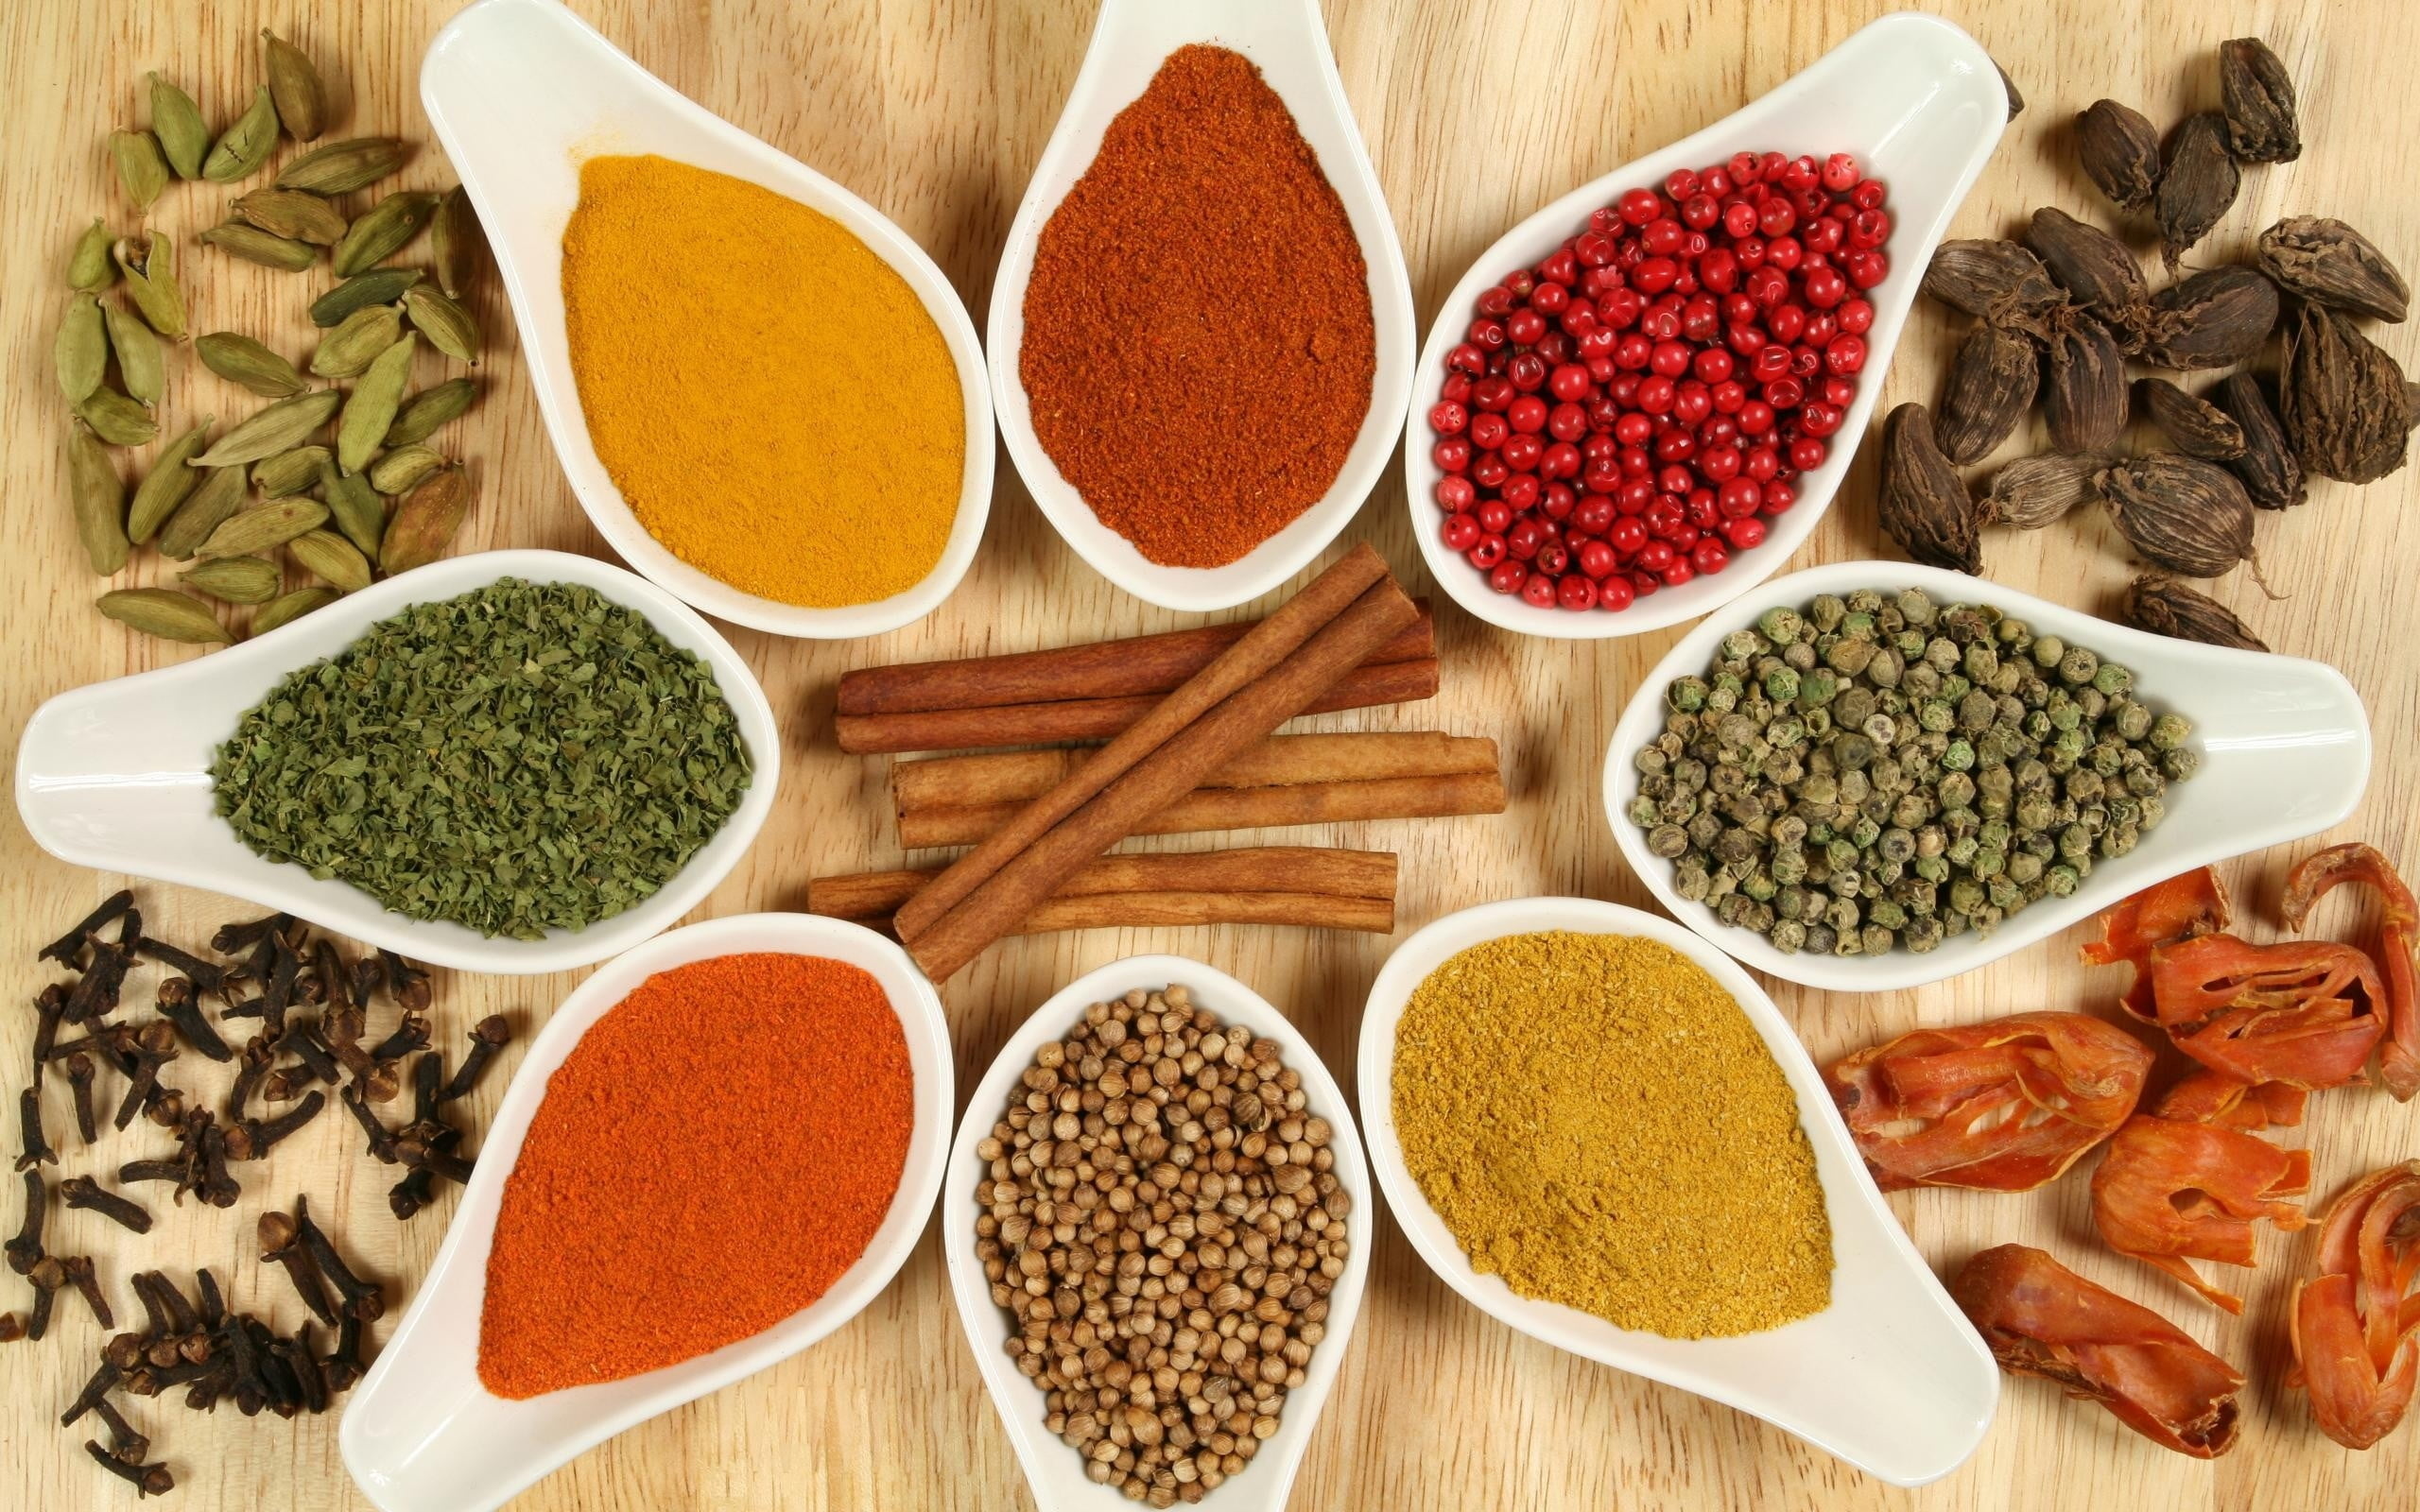 Assorted spices, Culinary variety, Flavorful cooking, Exquisite tastes, 2560x1600 HD Desktop